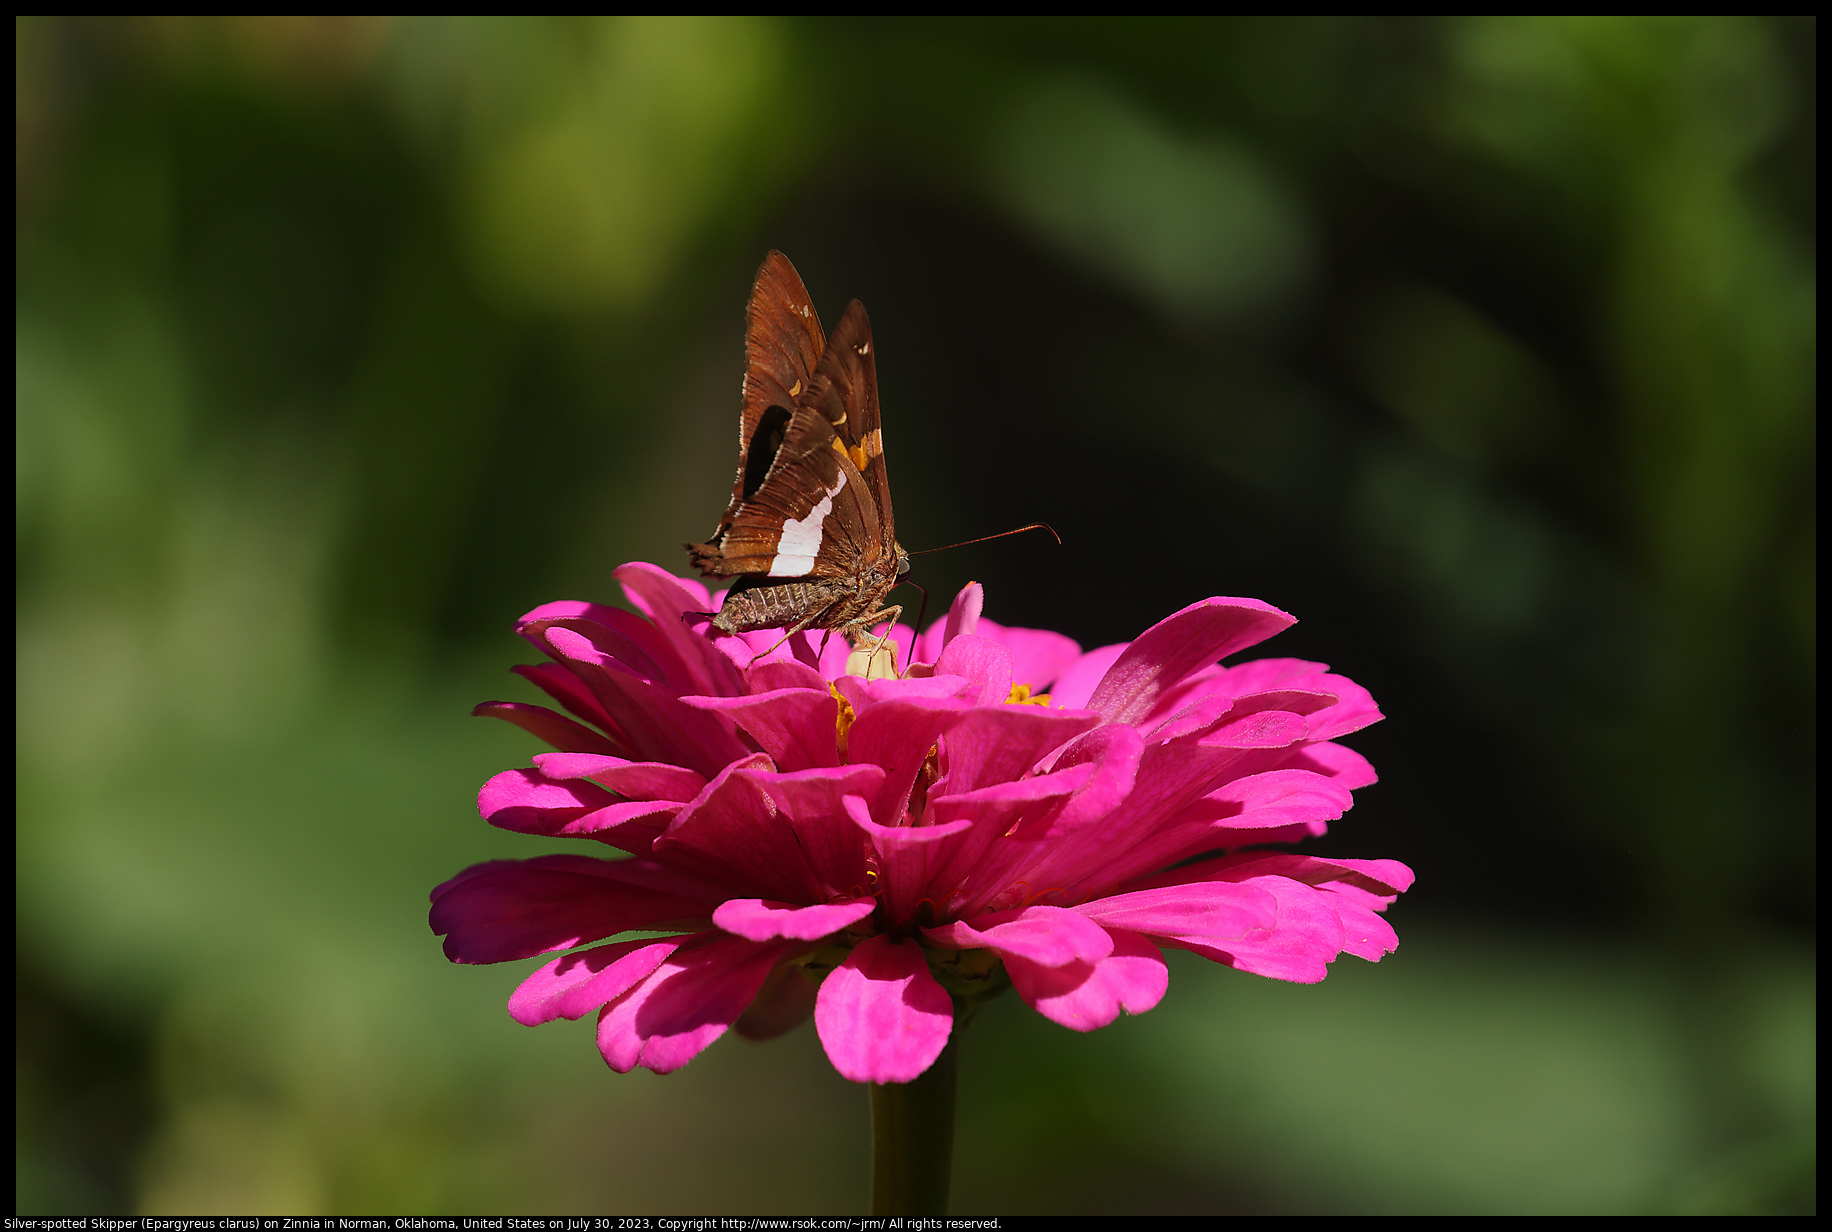 Silver-spotted Skipper (Epargyreus clarus) on Zinnia in Norman, Oklahoma, United States on July 30, 2023